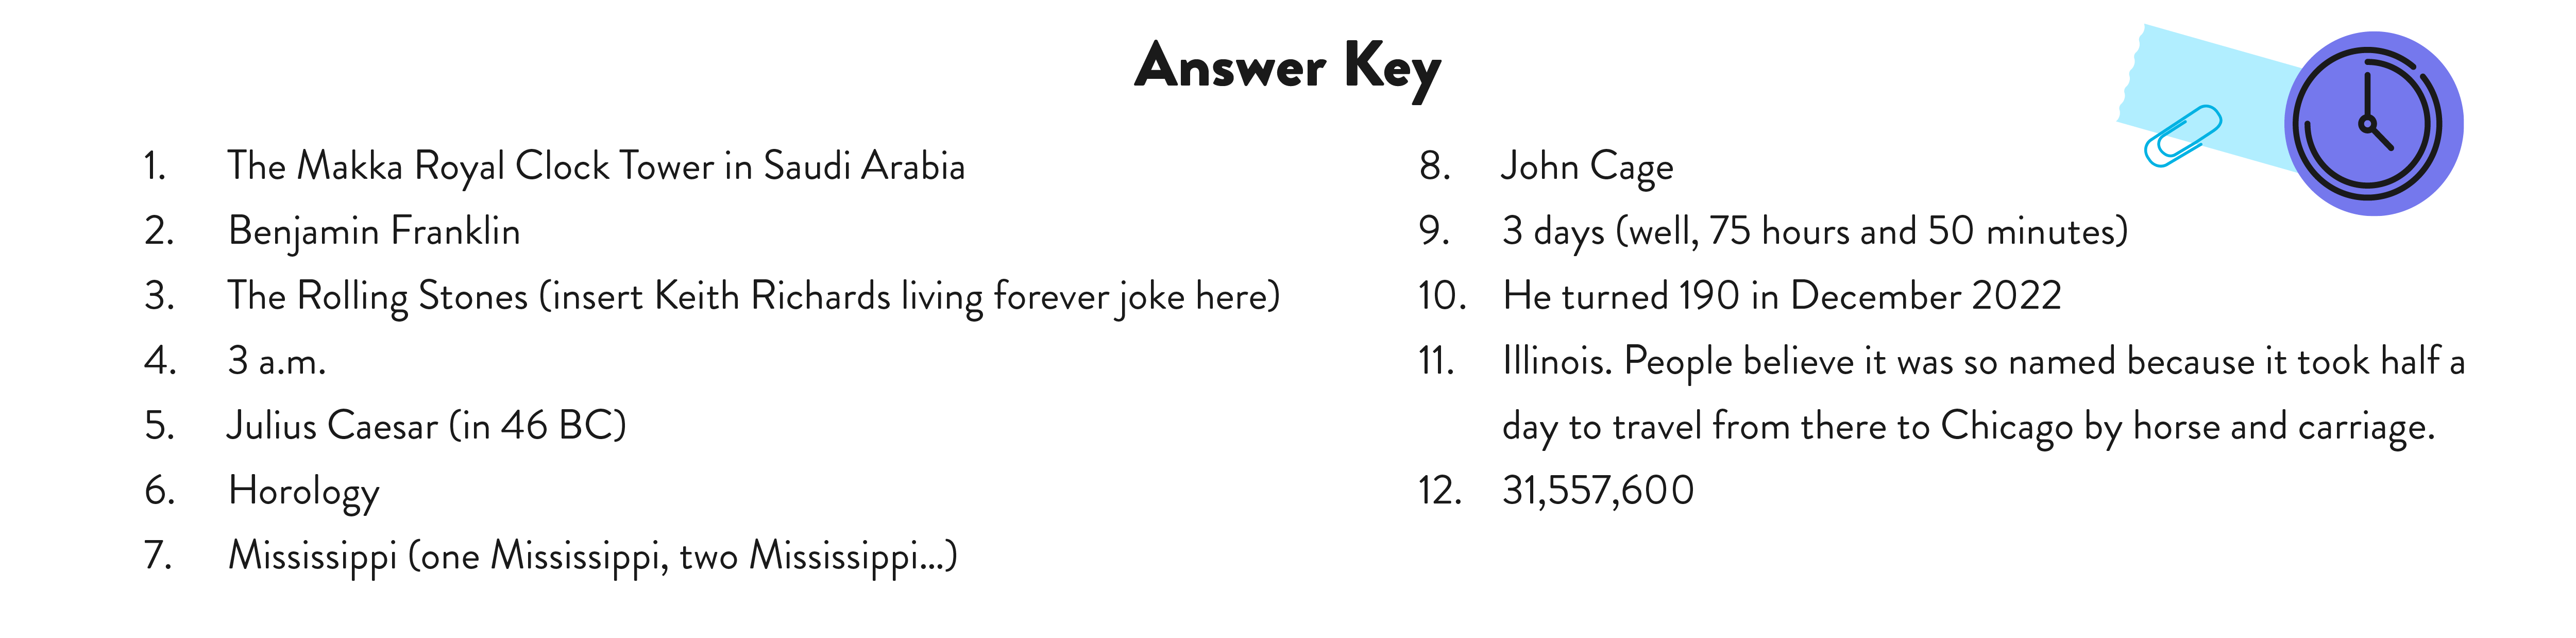 Answers: 1. The Makka Royal Clock Tower in Saudi Arabia, 2. Benjamin Franklin, 3. The Rolling Stones (insert Keith Richards living forever joke here), 4. 3 a.m., 5. Julius Caesar (in 46 BC), 6. Horology, 7. Mississippi (one Mississippi, two Mississippi…), 8. John Cage, 9. 3 days (well, 75 hours and 50 minutes), 10. He turned 190 in December 2022, 11. Illinois. People believe it was so named because it took half a day to travel from there to Chicago by horse and carriage. 12. 31,557,600 